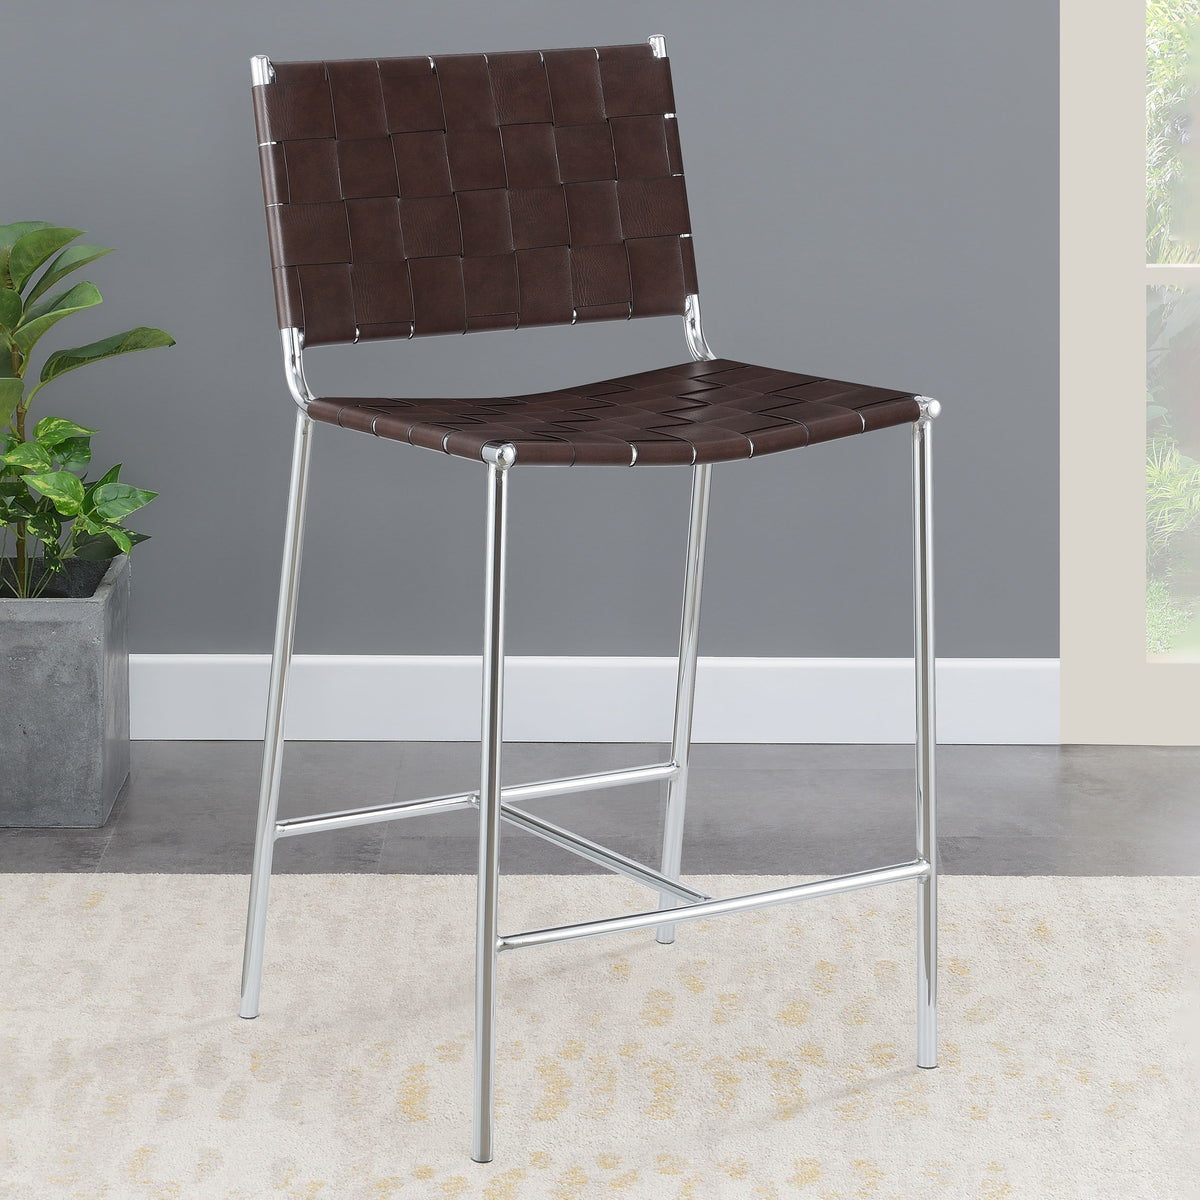 Adelaide Upholstered Counter Height Stool with Open Back Brown and Chrome Adelaide Upholstered Counter Height Stool with Open Back Brown and Chrome Half Price Furniture